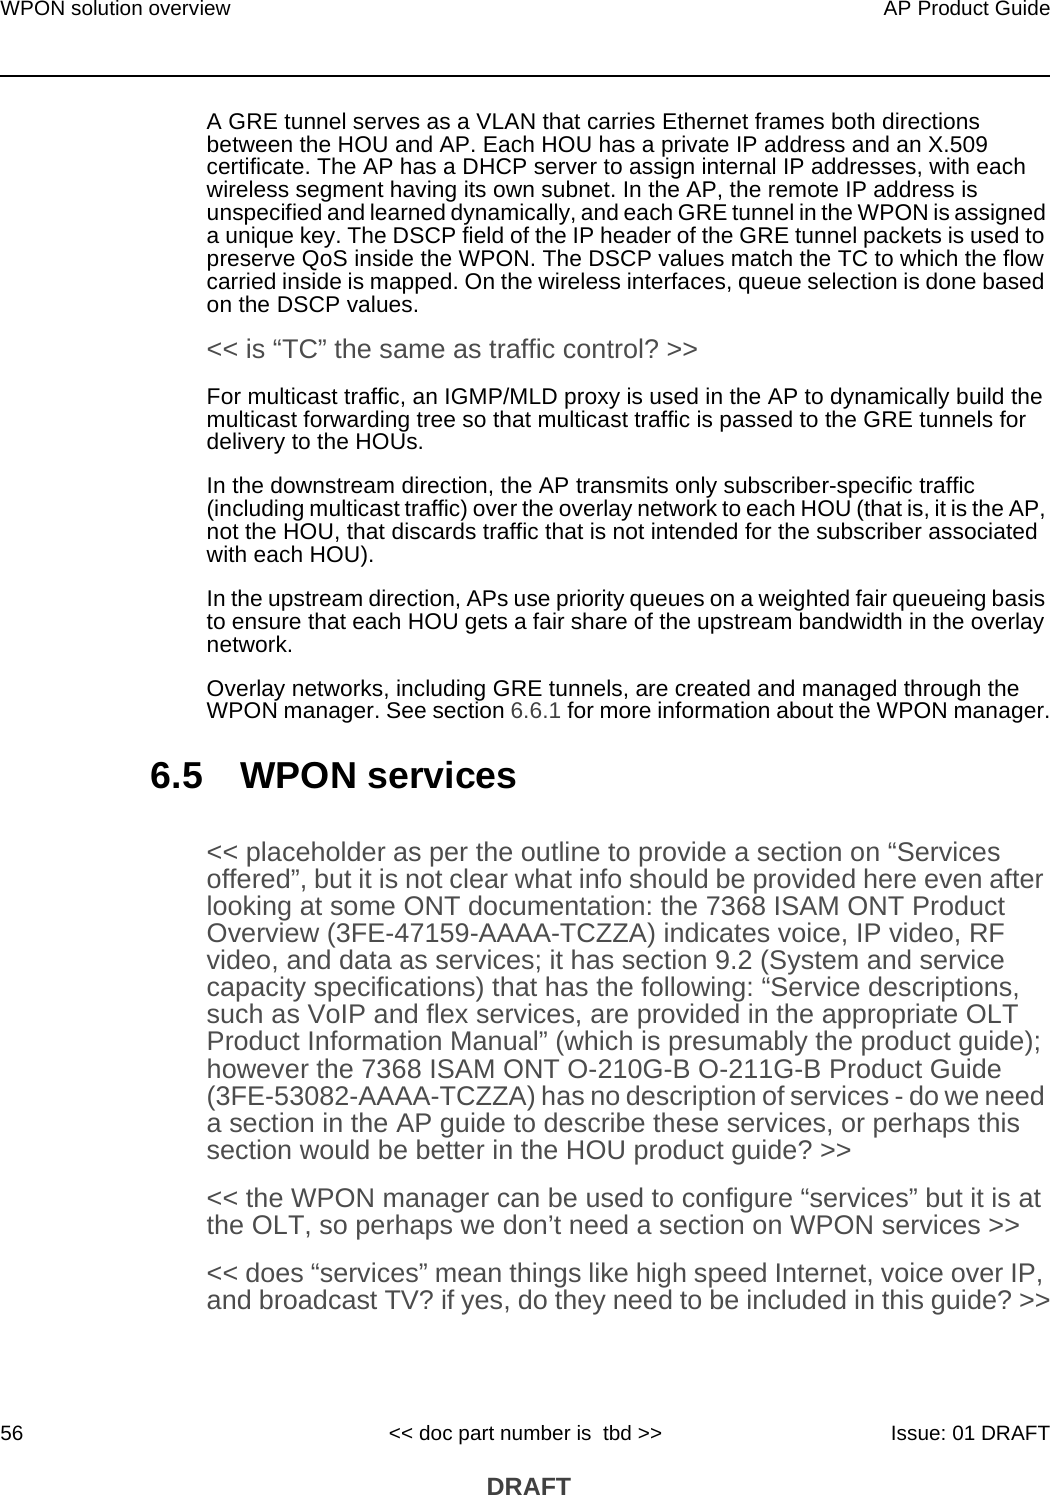 WPON solution overview56AP Product Guide&lt;&lt; doc part number is  tbd &gt;&gt; Issue: 01 DRAFT DRAFTA GRE tunnel serves as a VLAN that carries Ethernet frames both directions between the HOU and AP. Each HOU has a private IP address and an X.509 certificate. The AP has a DHCP server to assign internal IP addresses, with each wireless segment having its own subnet. In the AP, the remote IP address is unspecified and learned dynamically, and each GRE tunnel in the WPON is assigned a unique key. The DSCP field of the IP header of the GRE tunnel packets is used to preserve QoS inside the WPON. The DSCP values match the TC to which the flow carried inside is mapped. On the wireless interfaces, queue selection is done based on the DSCP values.&lt;&lt; is “TC” the same as traffic control? &gt;&gt; For multicast traffic, an IGMP/MLD proxy is used in the AP to dynamically build the multicast forwarding tree so that multicast traffic is passed to the GRE tunnels for delivery to the HOUs.In the downstream direction, the AP transmits only subscriber-specific traffic (including multicast traffic) over the overlay network to each HOU (that is, it is the AP, not the HOU, that discards traffic that is not intended for the subscriber associated with each HOU). In the upstream direction, APs use priority queues on a weighted fair queueing basis to ensure that each HOU gets a fair share of the upstream bandwidth in the overlay network.Overlay networks, including GRE tunnels, are created and managed through the WPON manager. See section 6.6.1 for more information about the WPON manager.6.5 WPON services&lt;&lt; placeholder as per the outline to provide a section on “Services offered”, but it is not clear what info should be provided here even after looking at some ONT documentation: the 7368 ISAM ONT Product Overview (3FE-47159-AAAA-TCZZA) indicates voice, IP video, RF video, and data as services; it has section 9.2 (System and service capacity specifications) that has the following: “Service descriptions, such as VoIP and flex services, are provided in the appropriate OLT Product Information Manual” (which is presumably the product guide); however the 7368 ISAM ONT O-210G-B O-211G-B Product Guide (3FE-53082-AAAA-TCZZA) has no description of services - do we need a section in the AP guide to describe these services, or perhaps this section would be better in the HOU product guide? &gt;&gt;&lt;&lt; the WPON manager can be used to configure “services” but it is at the OLT, so perhaps we don’t need a section on WPON services &gt;&gt;&lt;&lt; does “services” mean things like high speed Internet, voice over IP, and broadcast TV? if yes, do they need to be included in this guide? &gt;&gt;